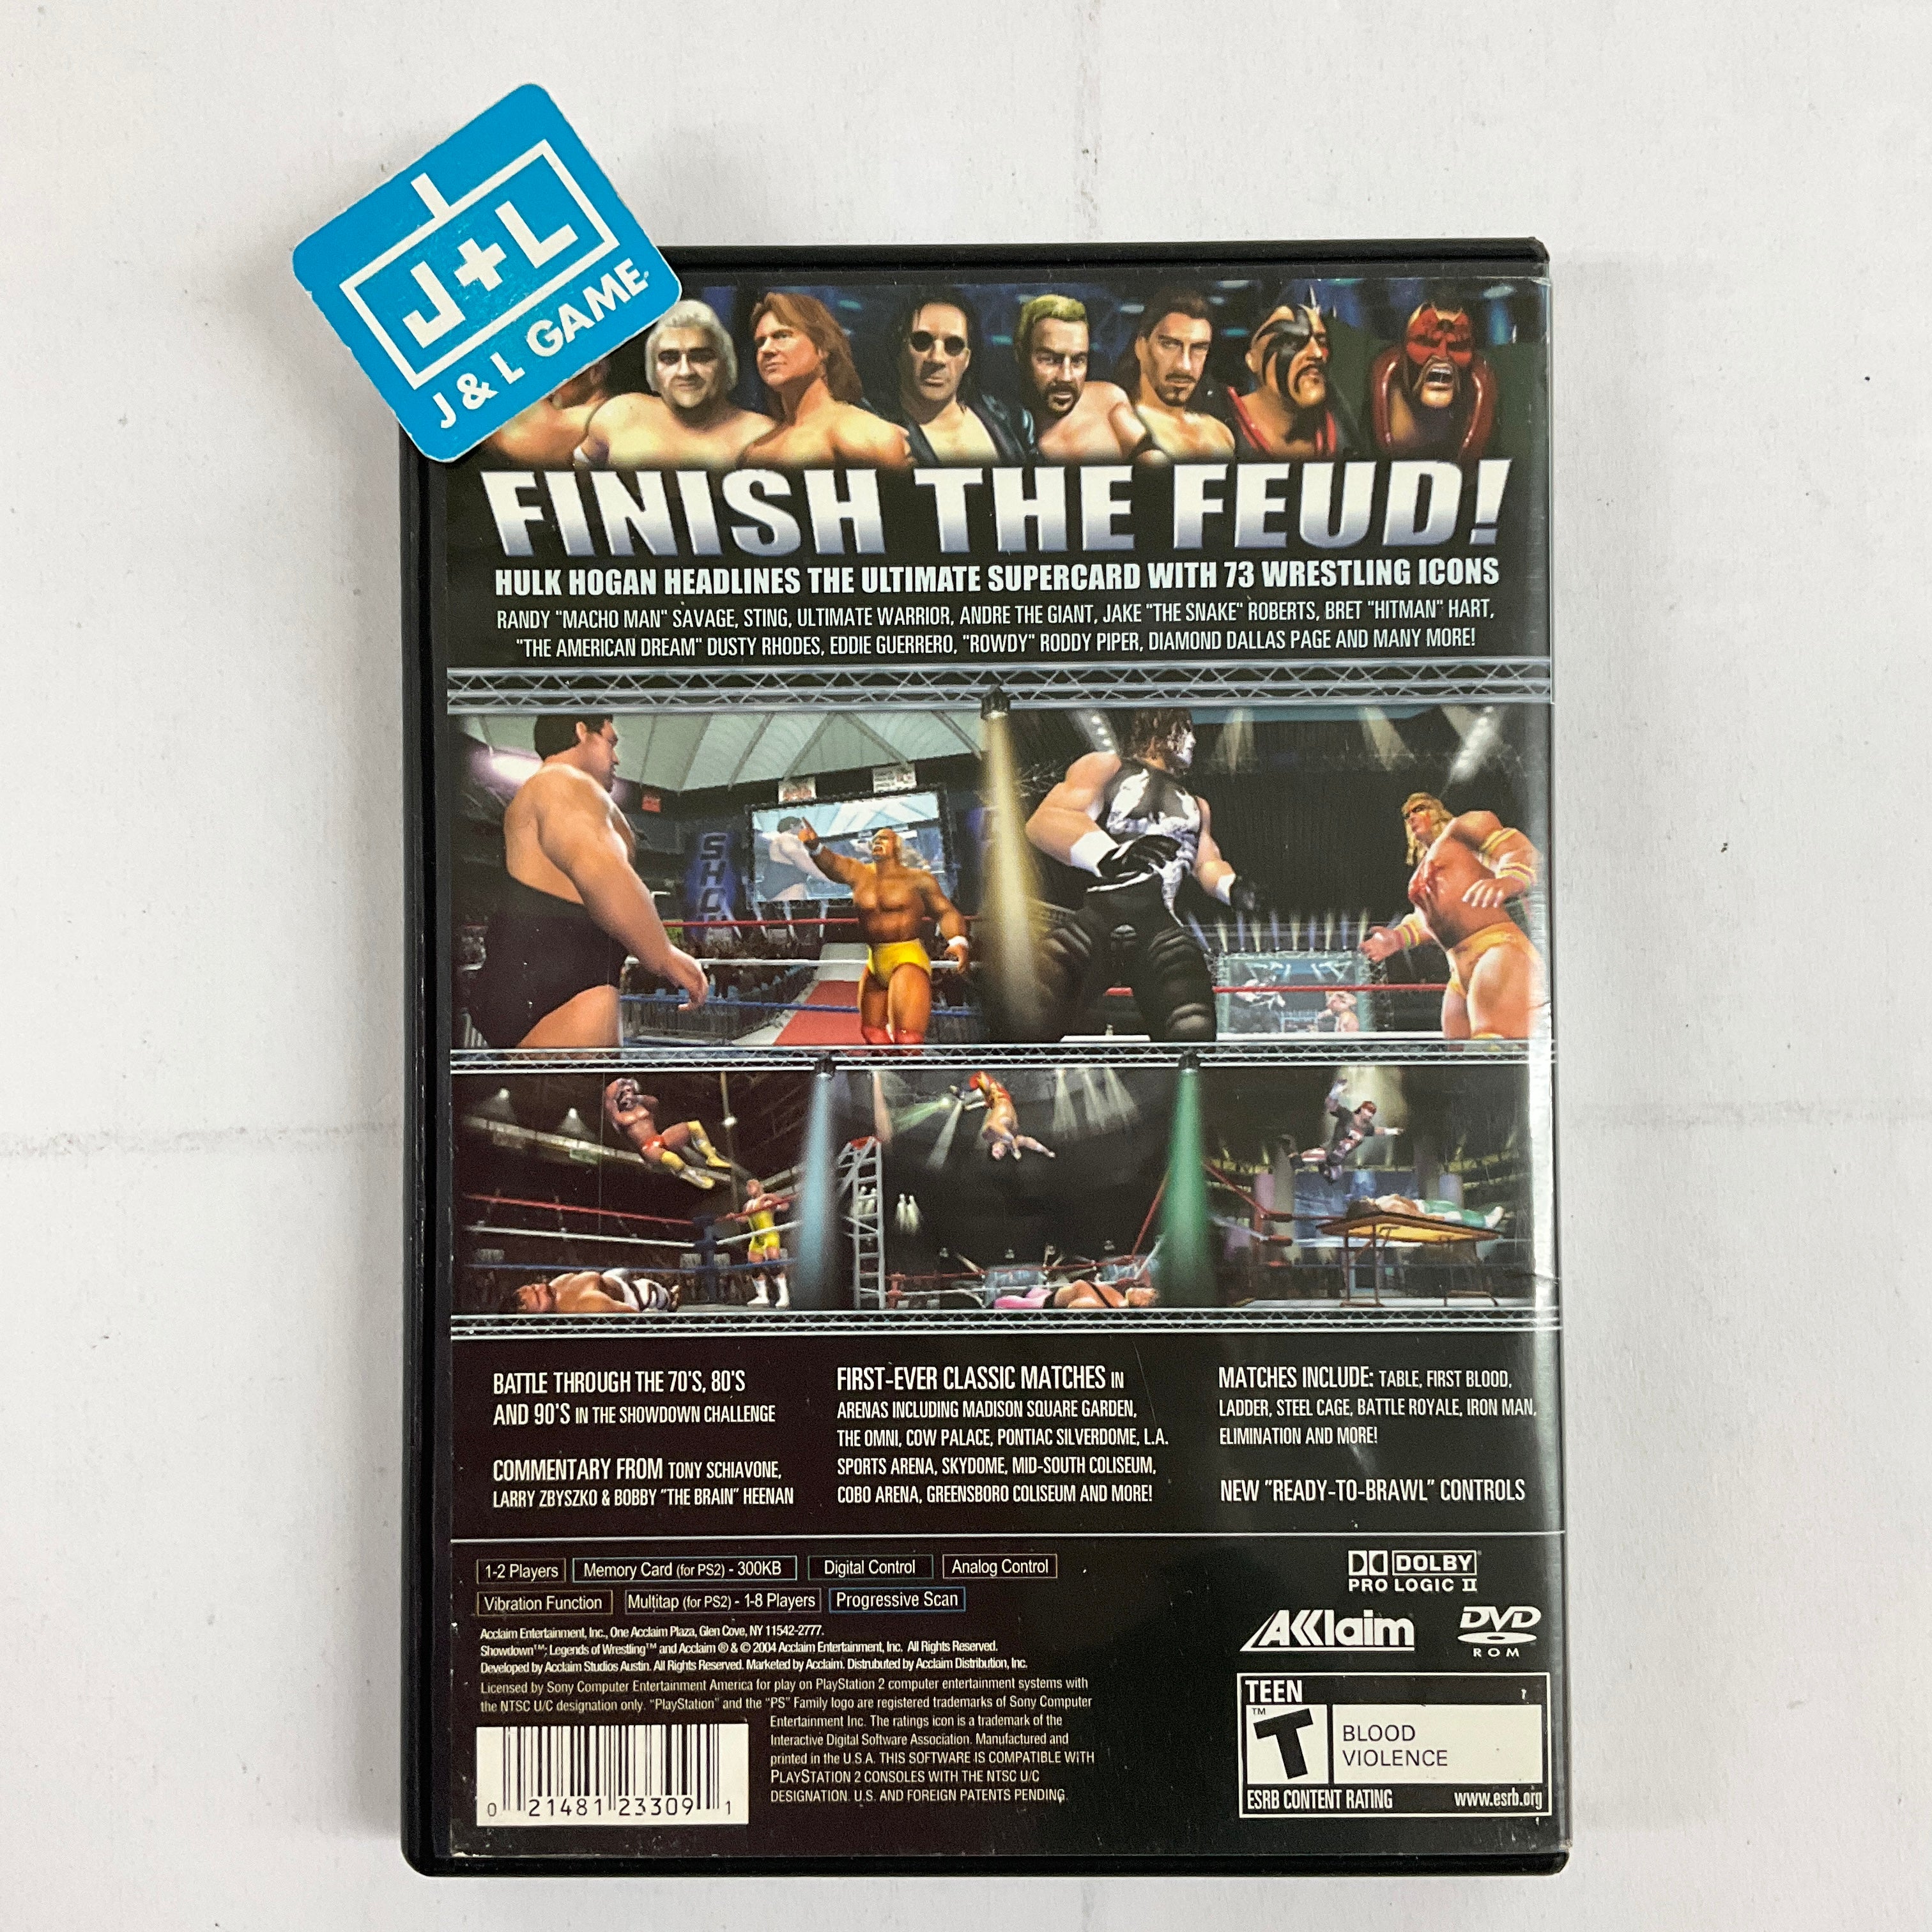 Showdown: Legends of Wrestling - (PS2) PlayStation 2 [Pre-Owned] Video Games Acclaim   